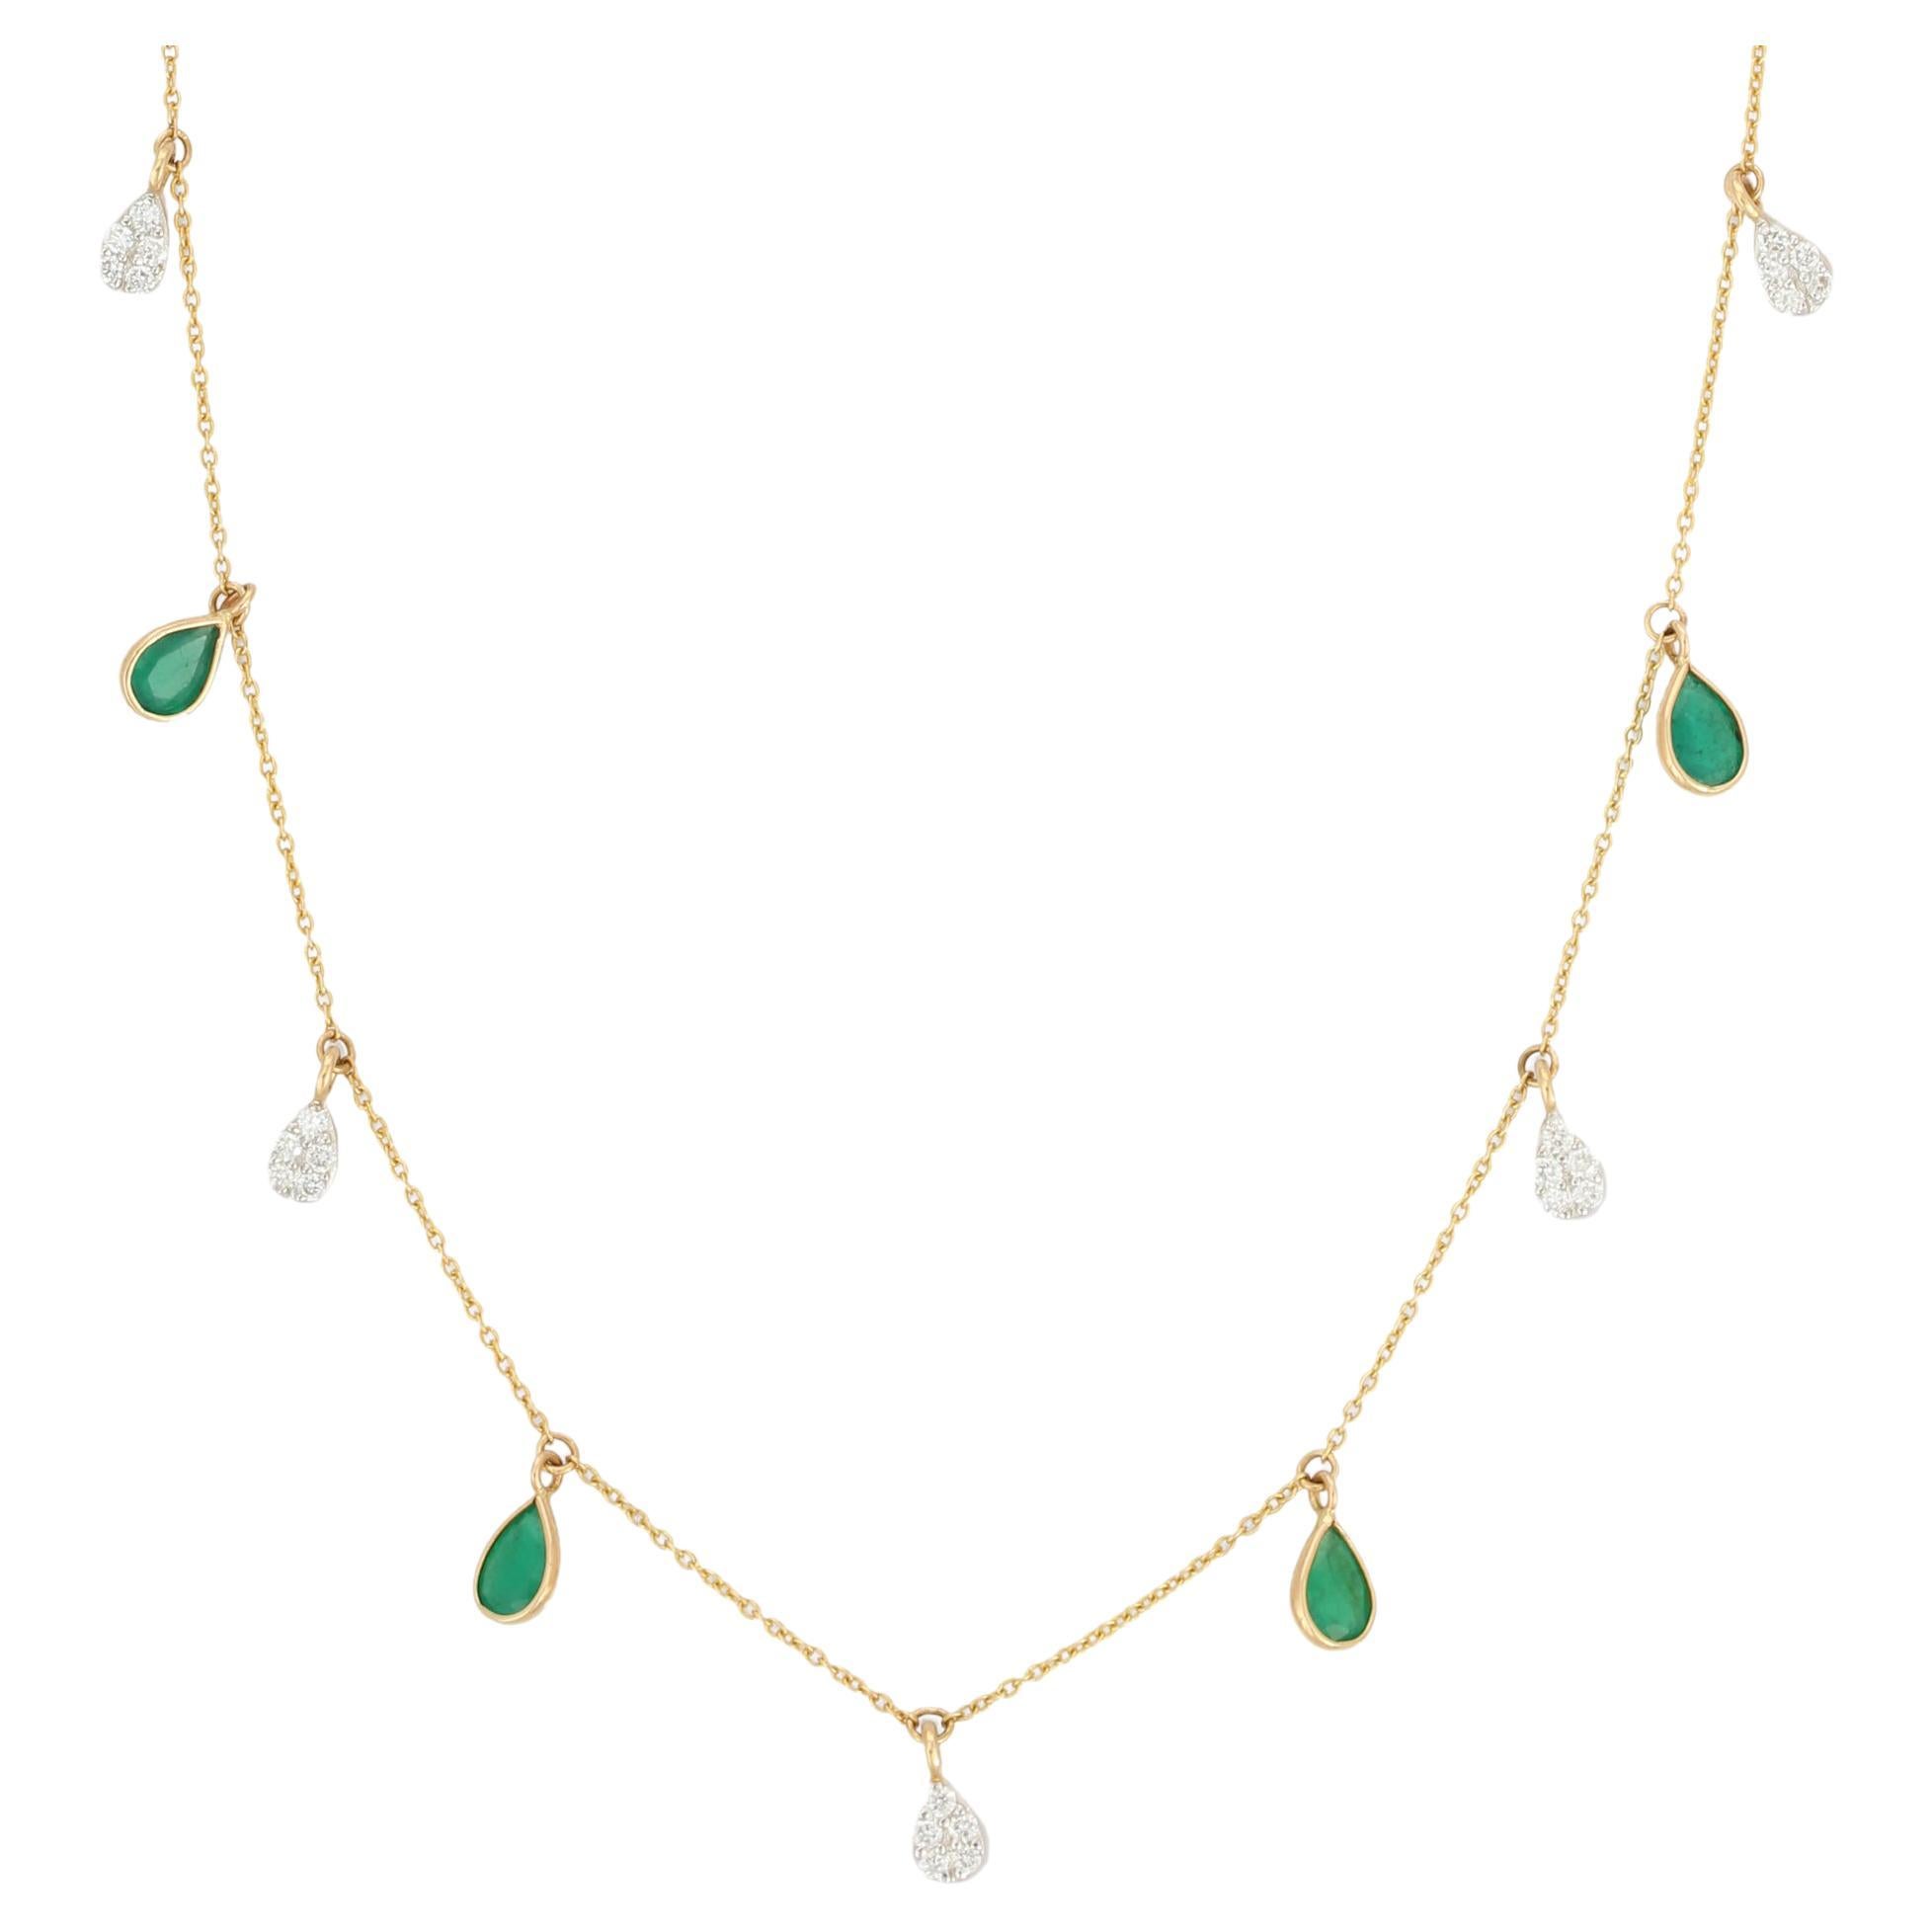 1.9 Carat Pear Cut Emerald and Diamond Drop Necklace in 18K Yellow Gold 